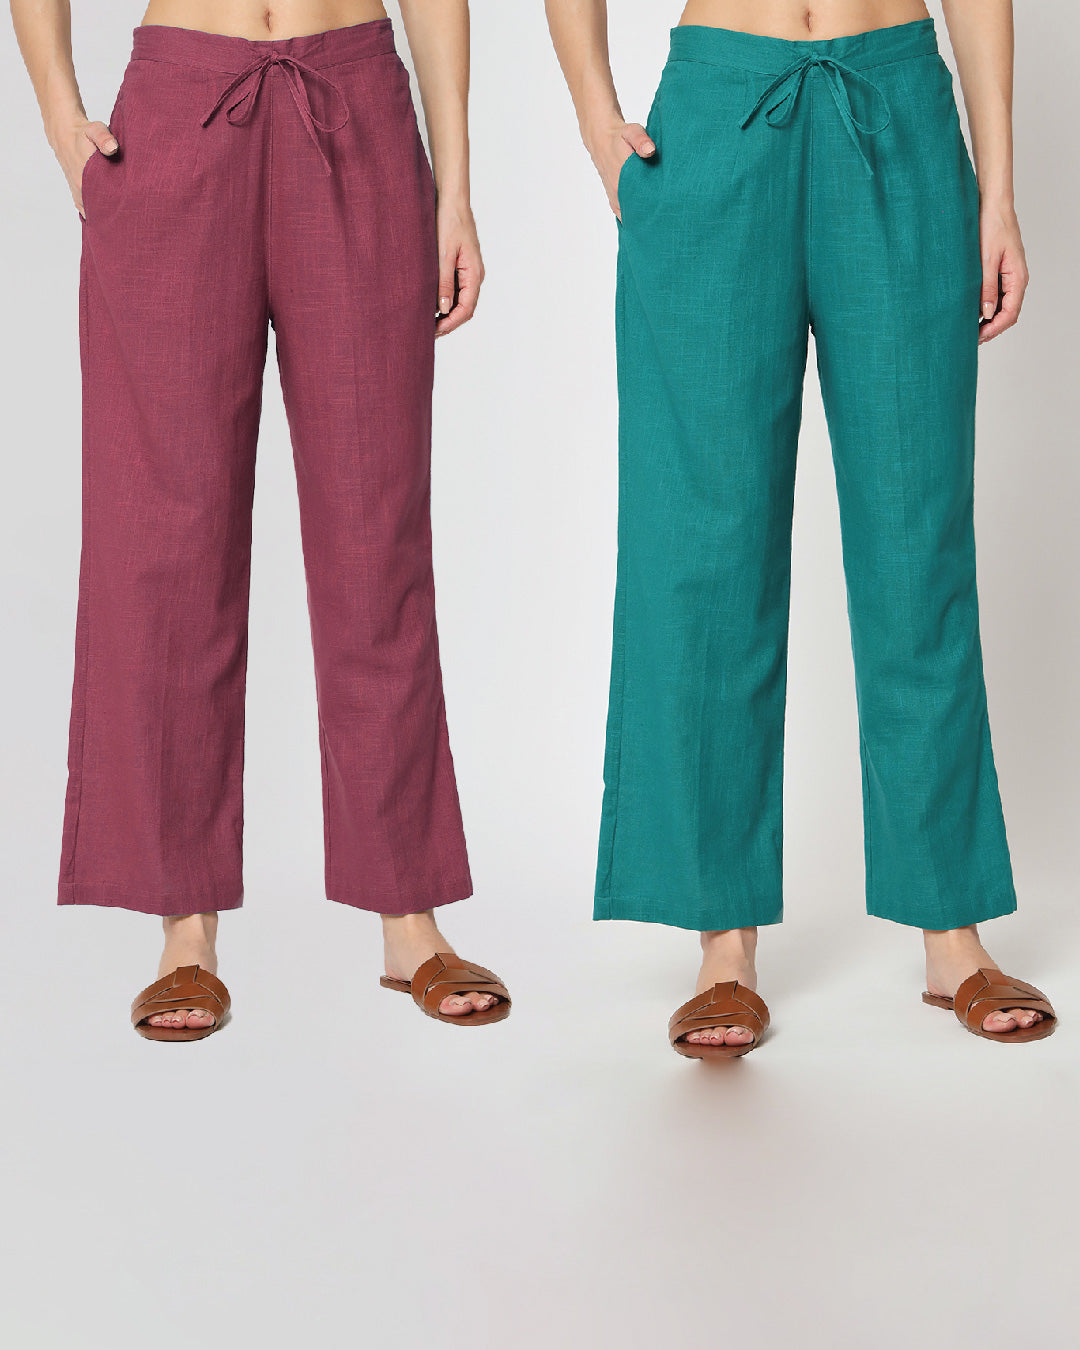 Combo: Wings of Love & Forest Green Straight Pants- Set of 2